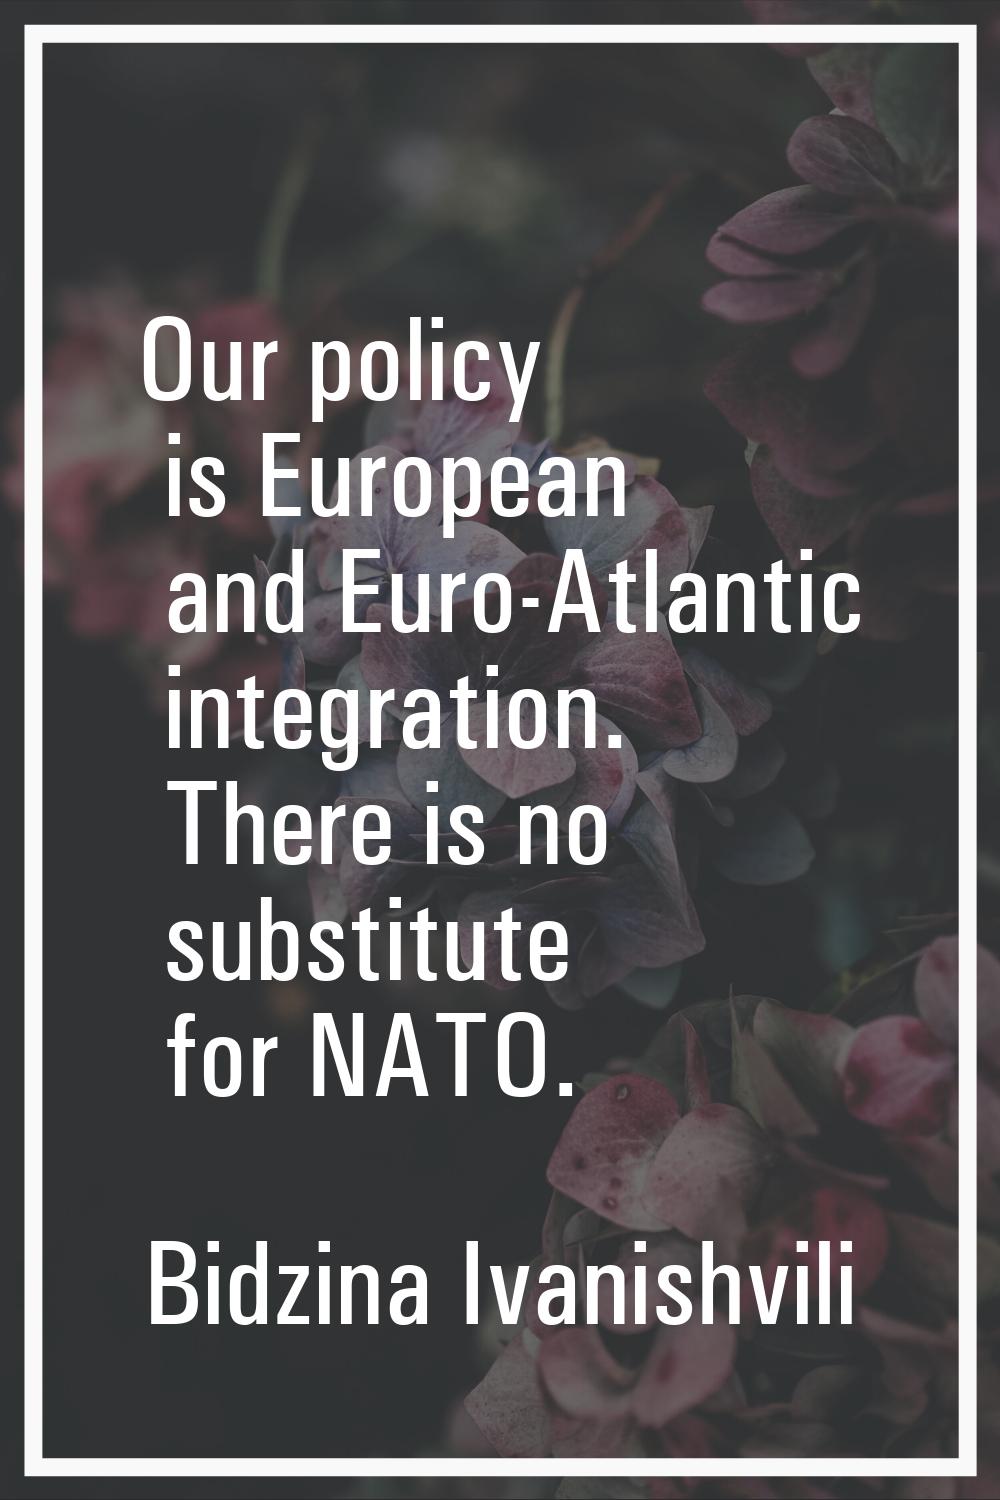 Our policy is European and Euro-Atlantic integration. There is no substitute for NATO.